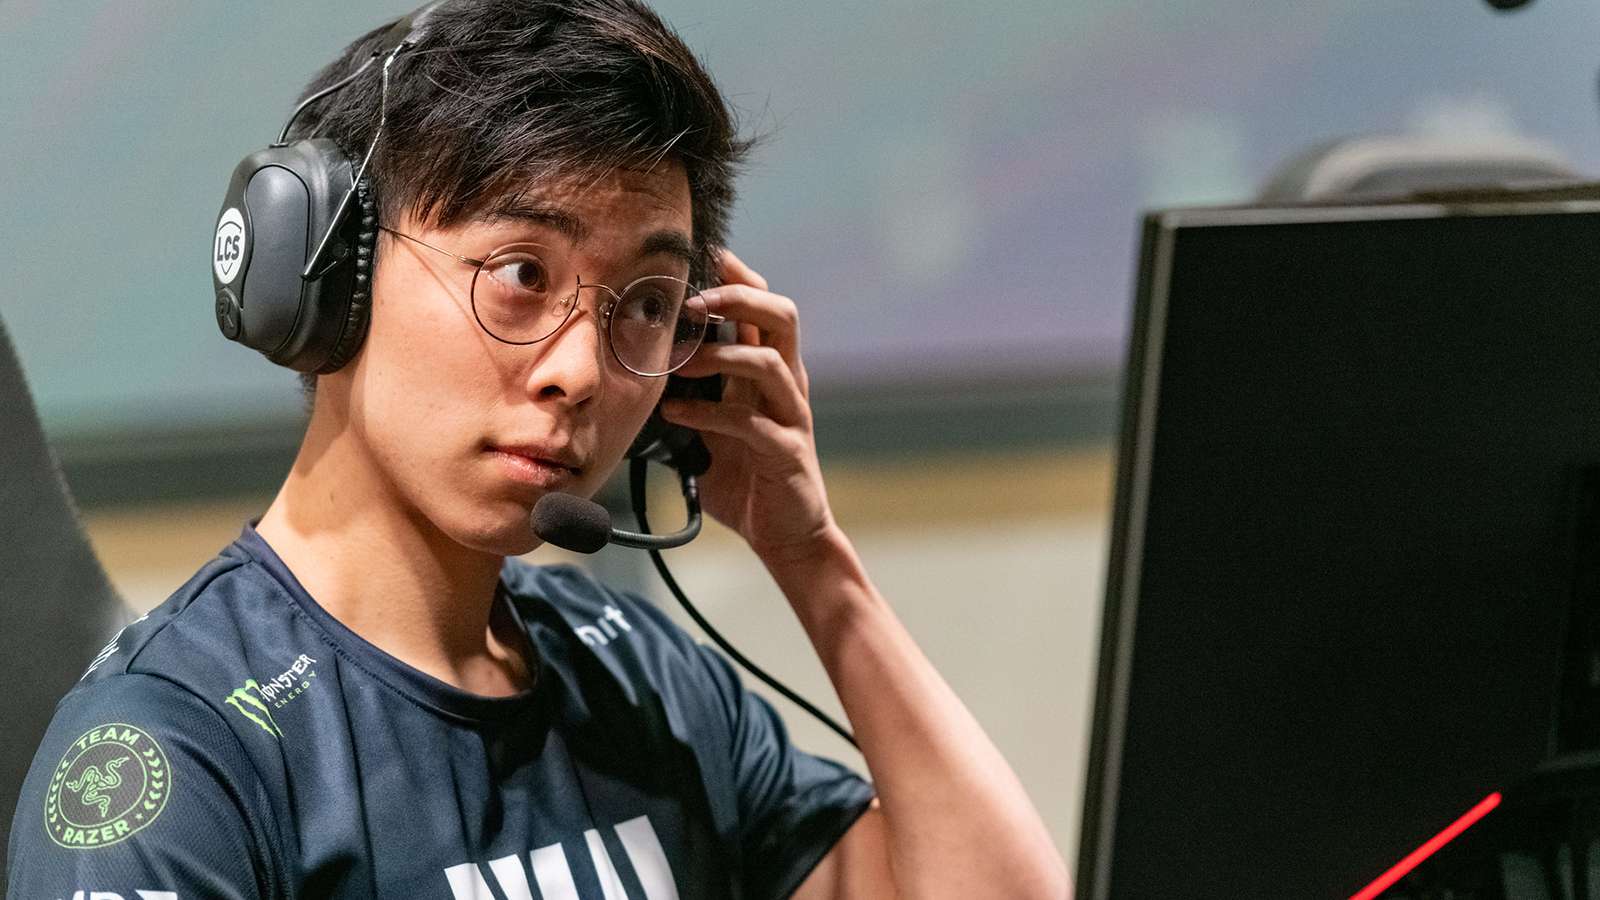 Deftly plays for Evil Geniuses League of Legends in LCS Lock In.